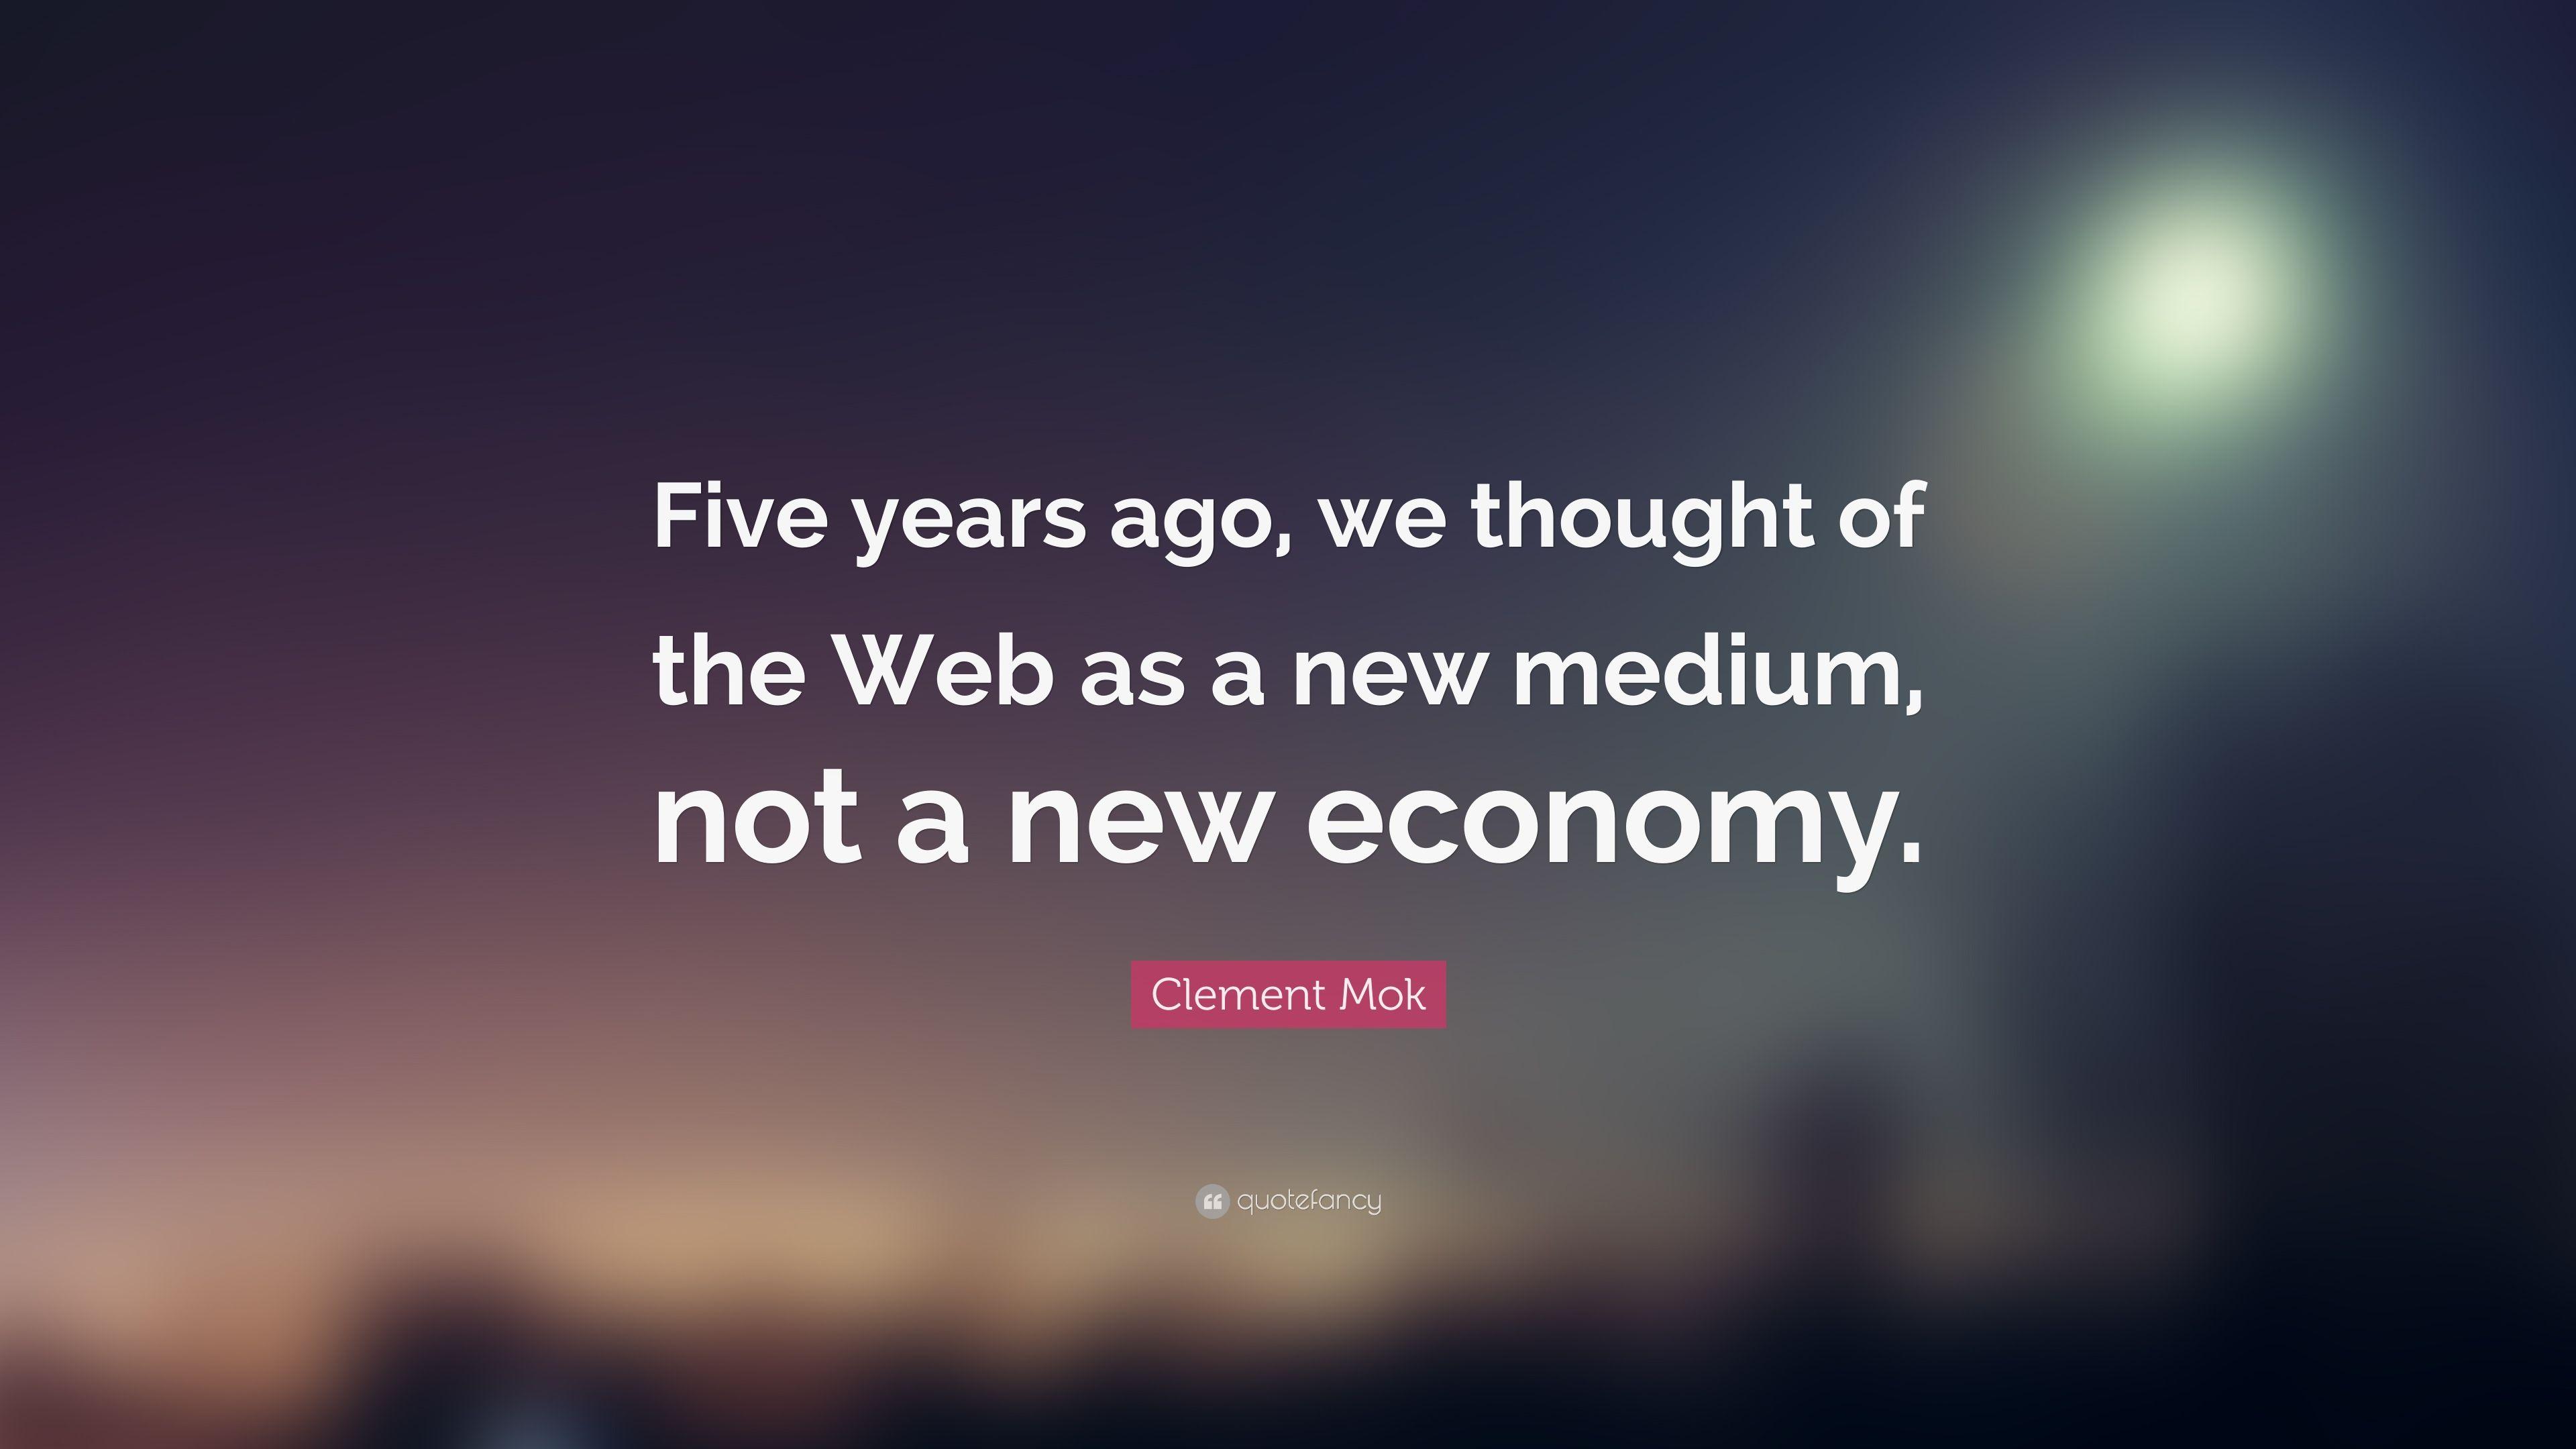 Clement Mok Quote: “Five years ago, we thought of the Web as a new